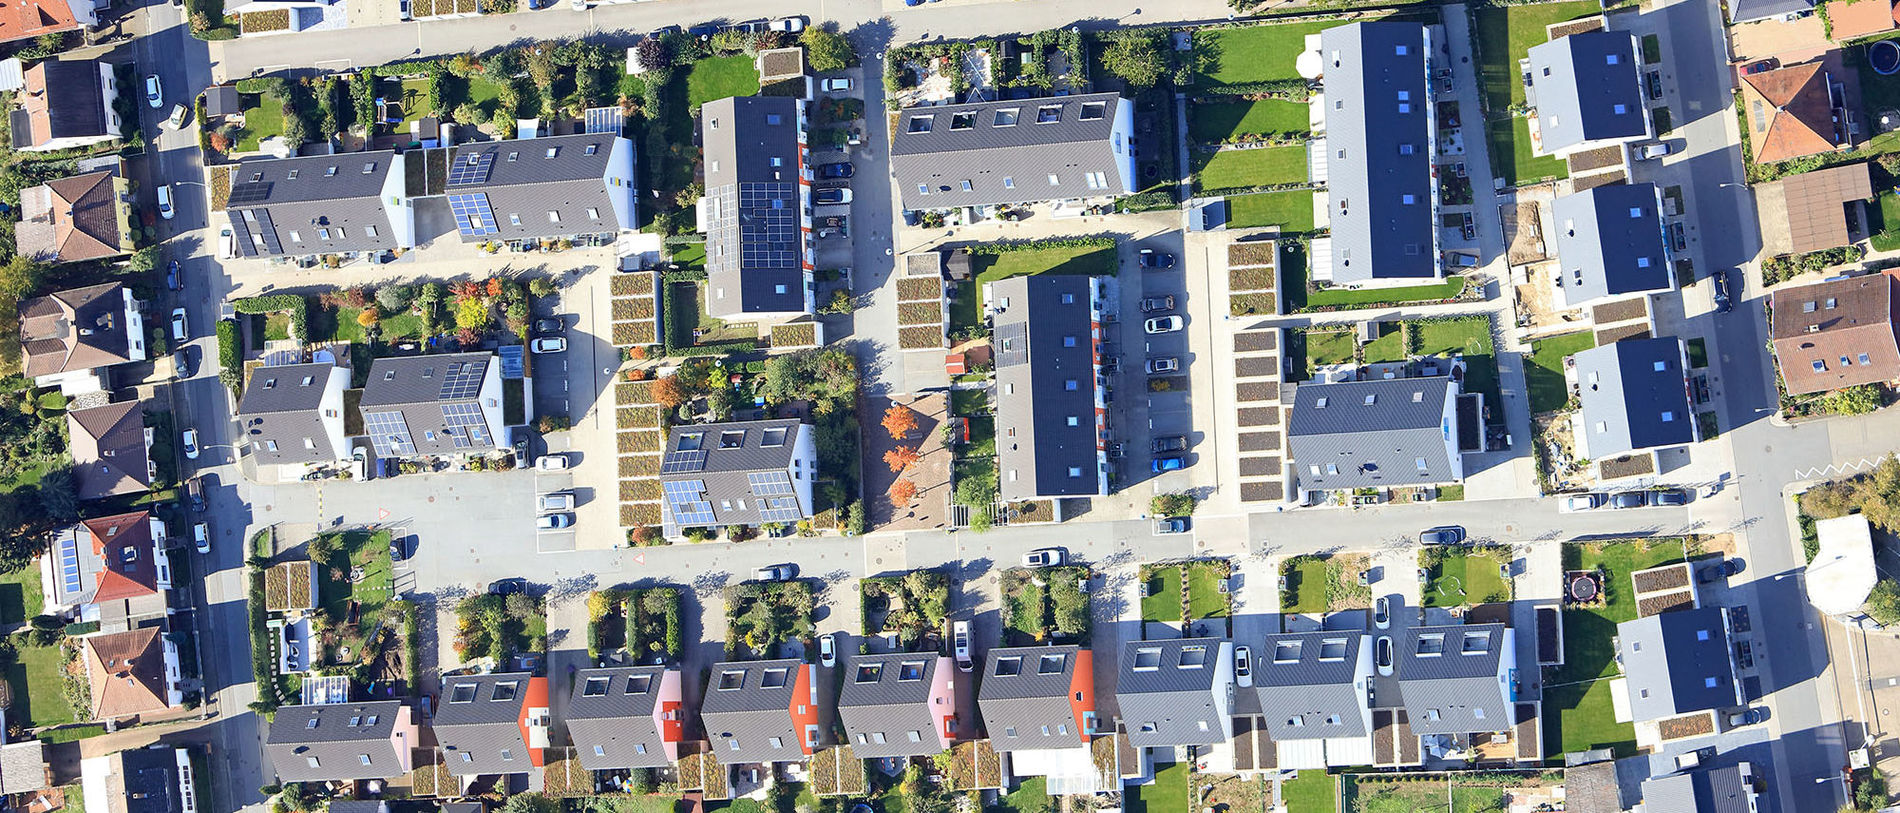 Aerial view of a large new housing estate with terraced and semi-detached houses